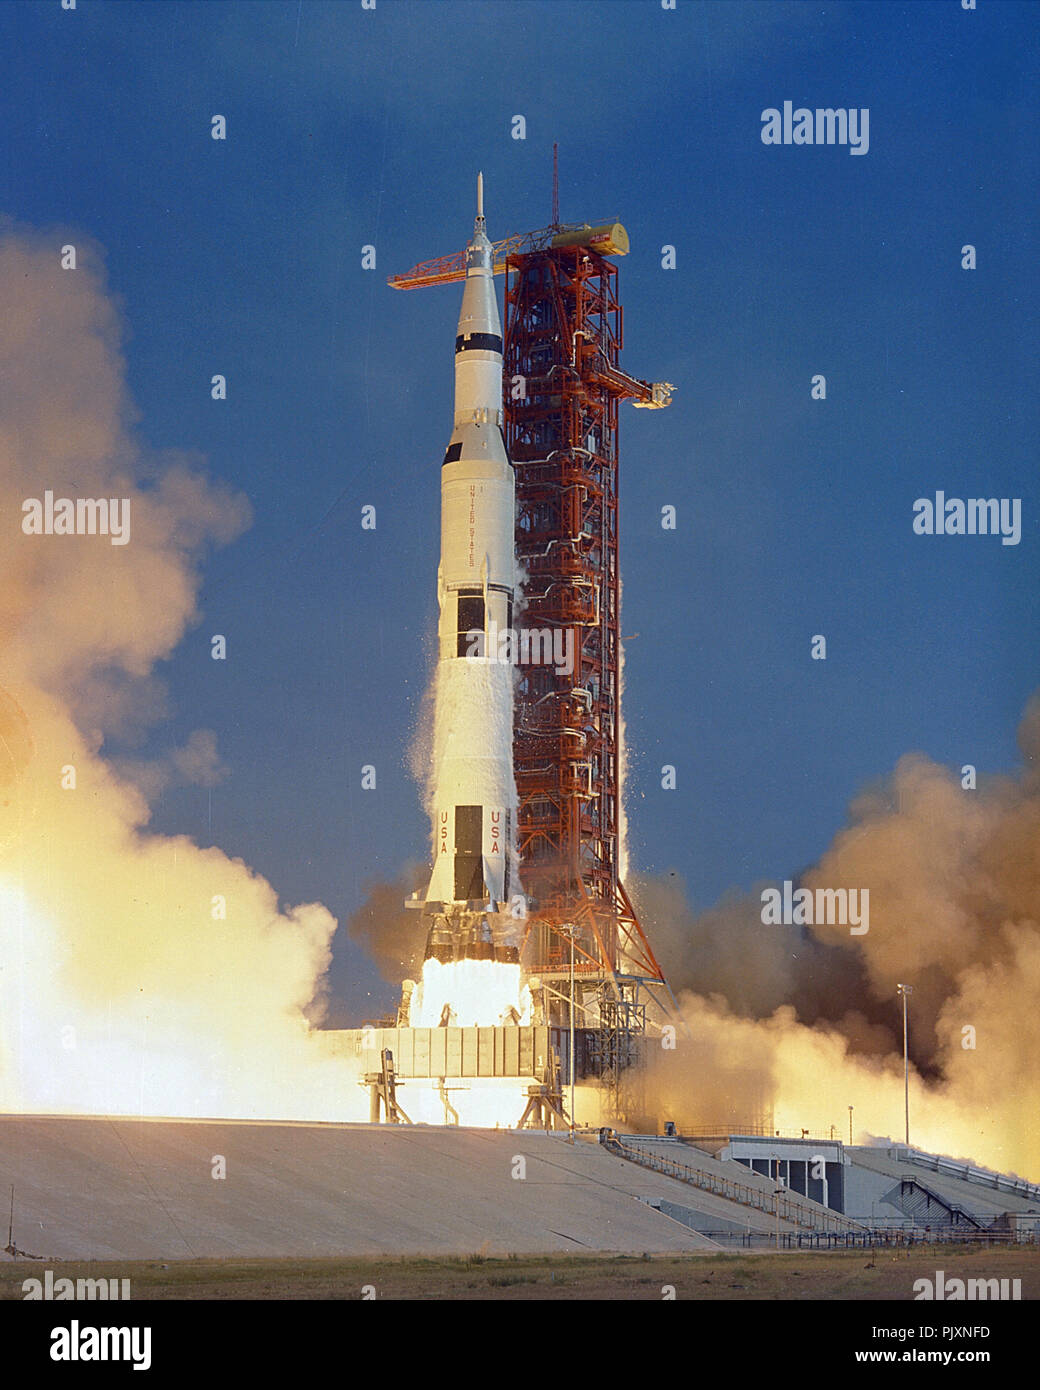 Cape Canaveral, FL - (FILE) -- The Apollo 11 Saturn V space vehicle lifts off with astronauts Neil A. Armstrong, Michael Collins and Edwin E. Aldrin, Jr., at 9:32 a.m. EDT, Wednesday, July 16, 1969, from Kennedy Space Center's Launch Complex 39A. Credit: NASA via CNP /MediaPunch Stock Photo